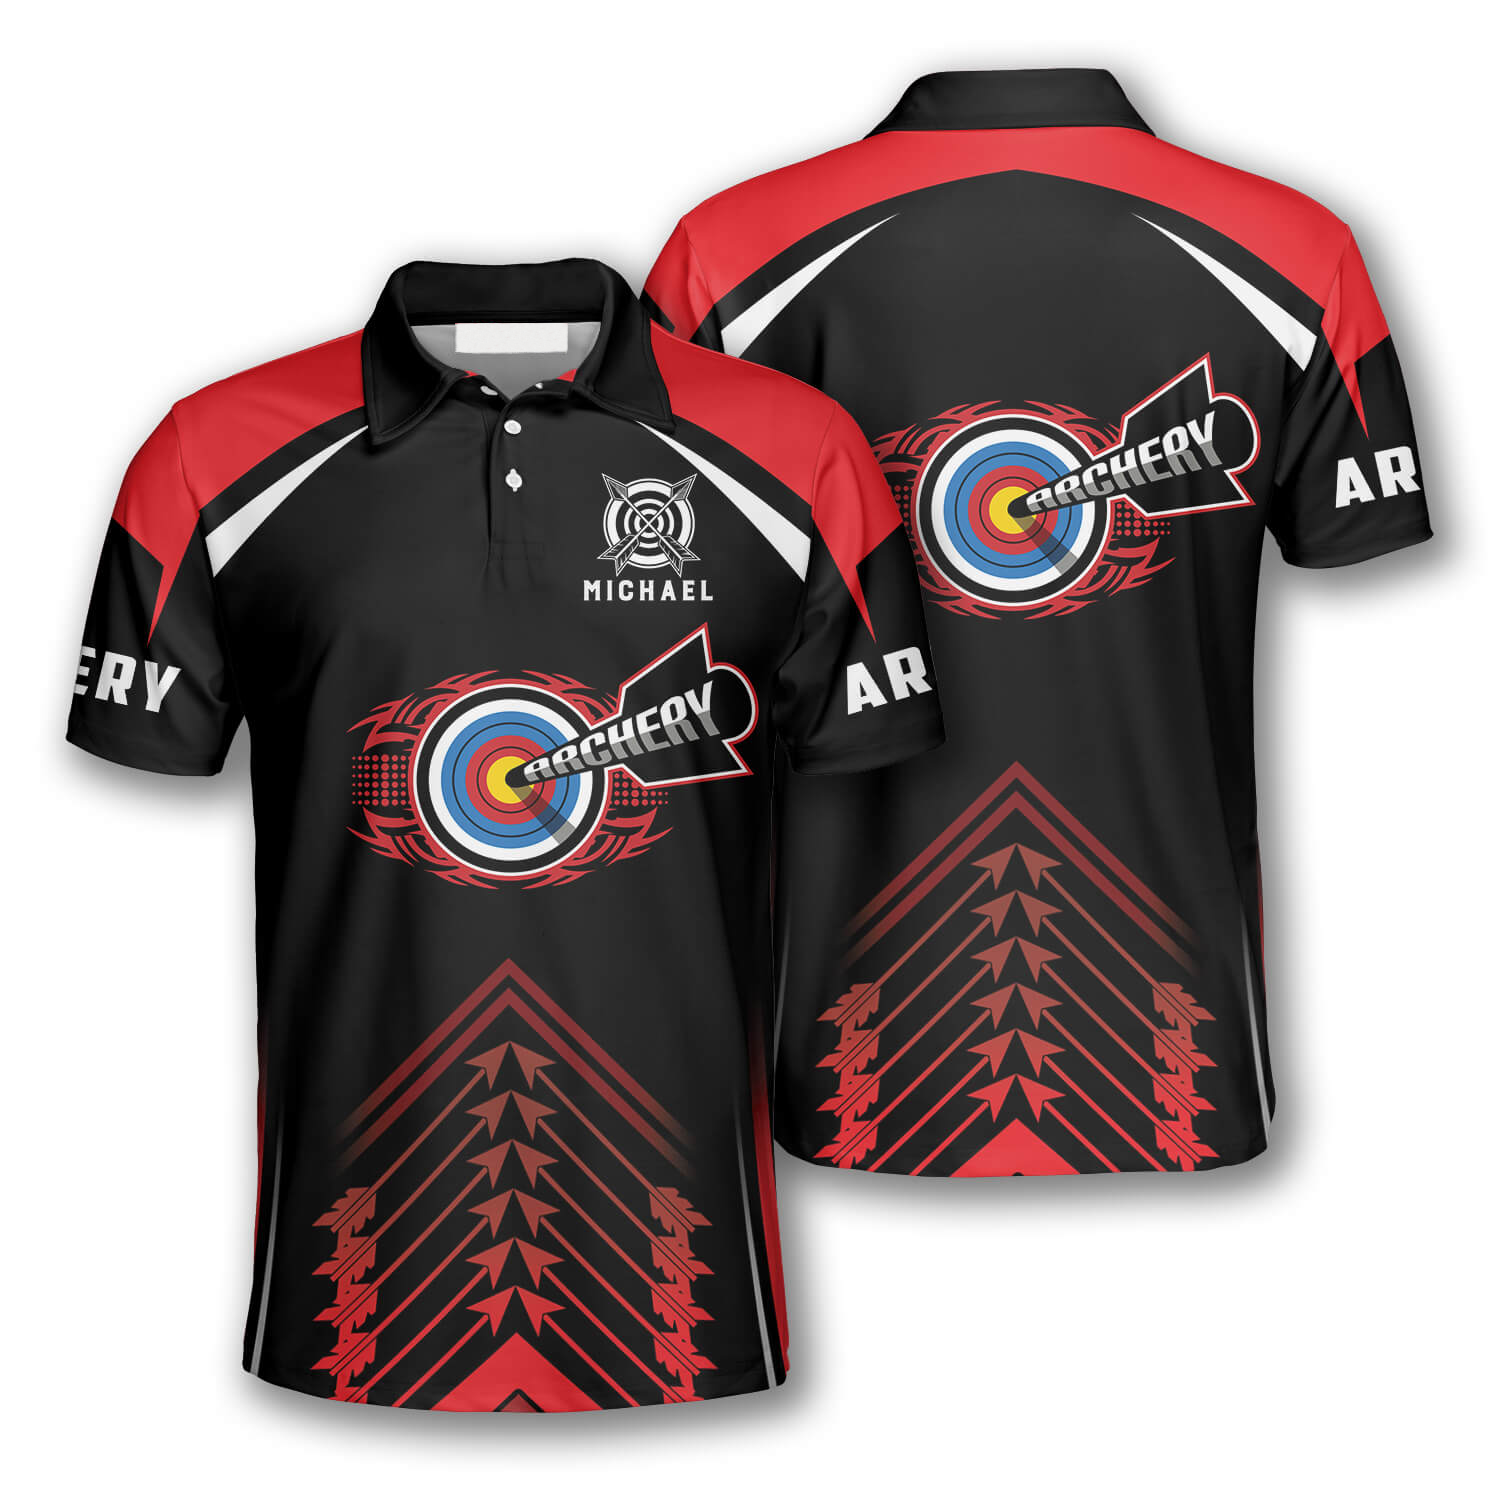 Personalized Archery Red Black Version Custom Archery Polo Shirts for Men